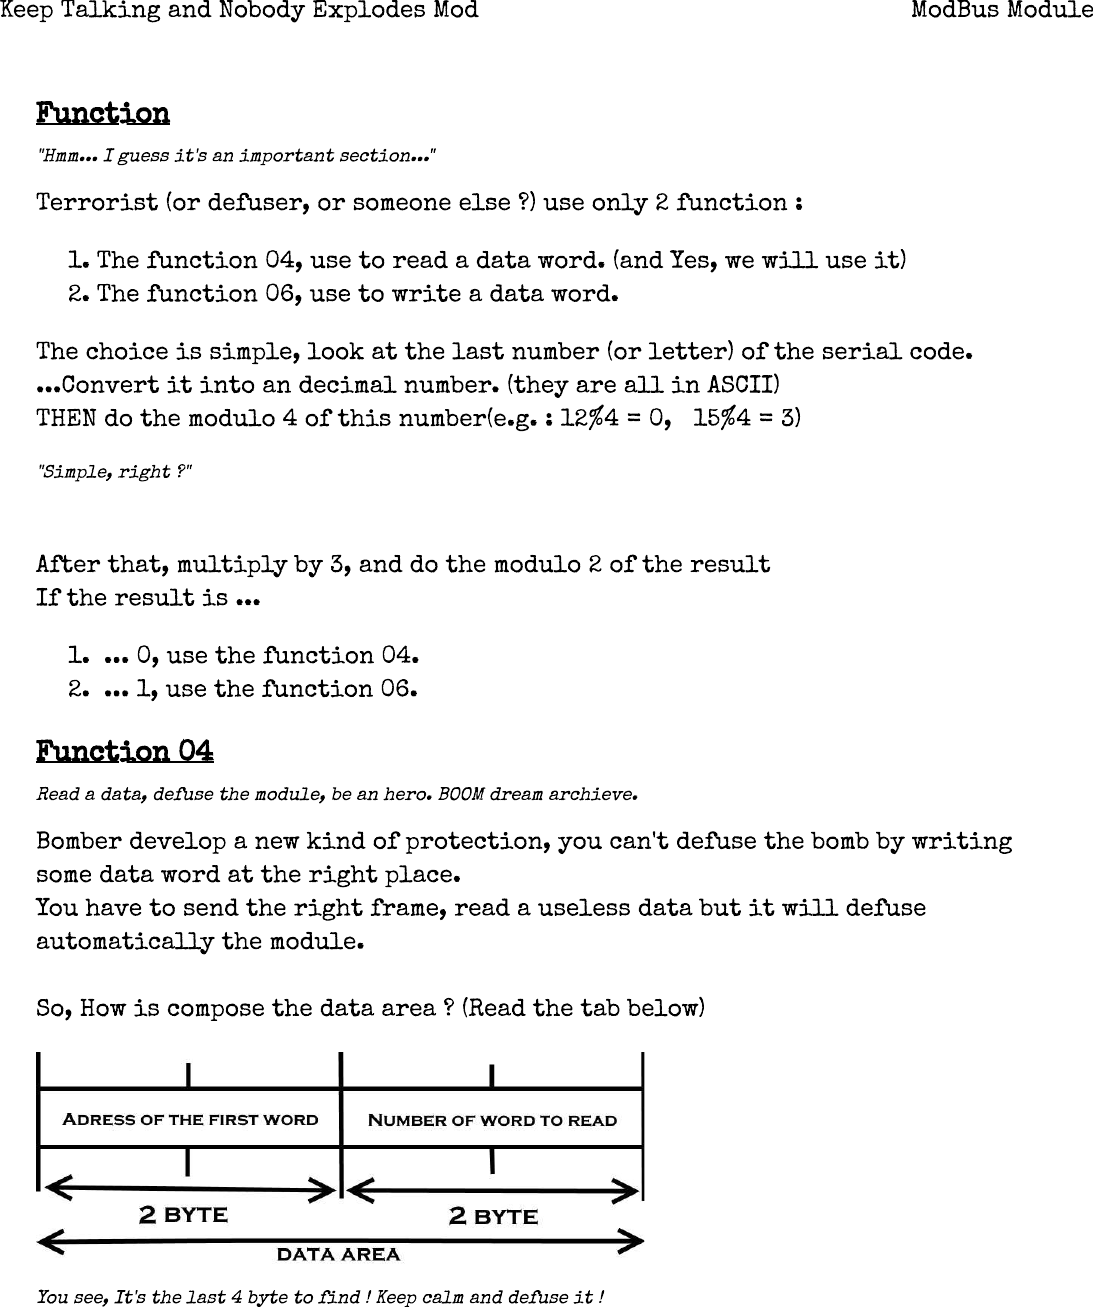 Page 2 of 5 - ModBus Module â•ﬂ Keep Talking And Nobody Explodes Mod Bus Manual PDF V1.0